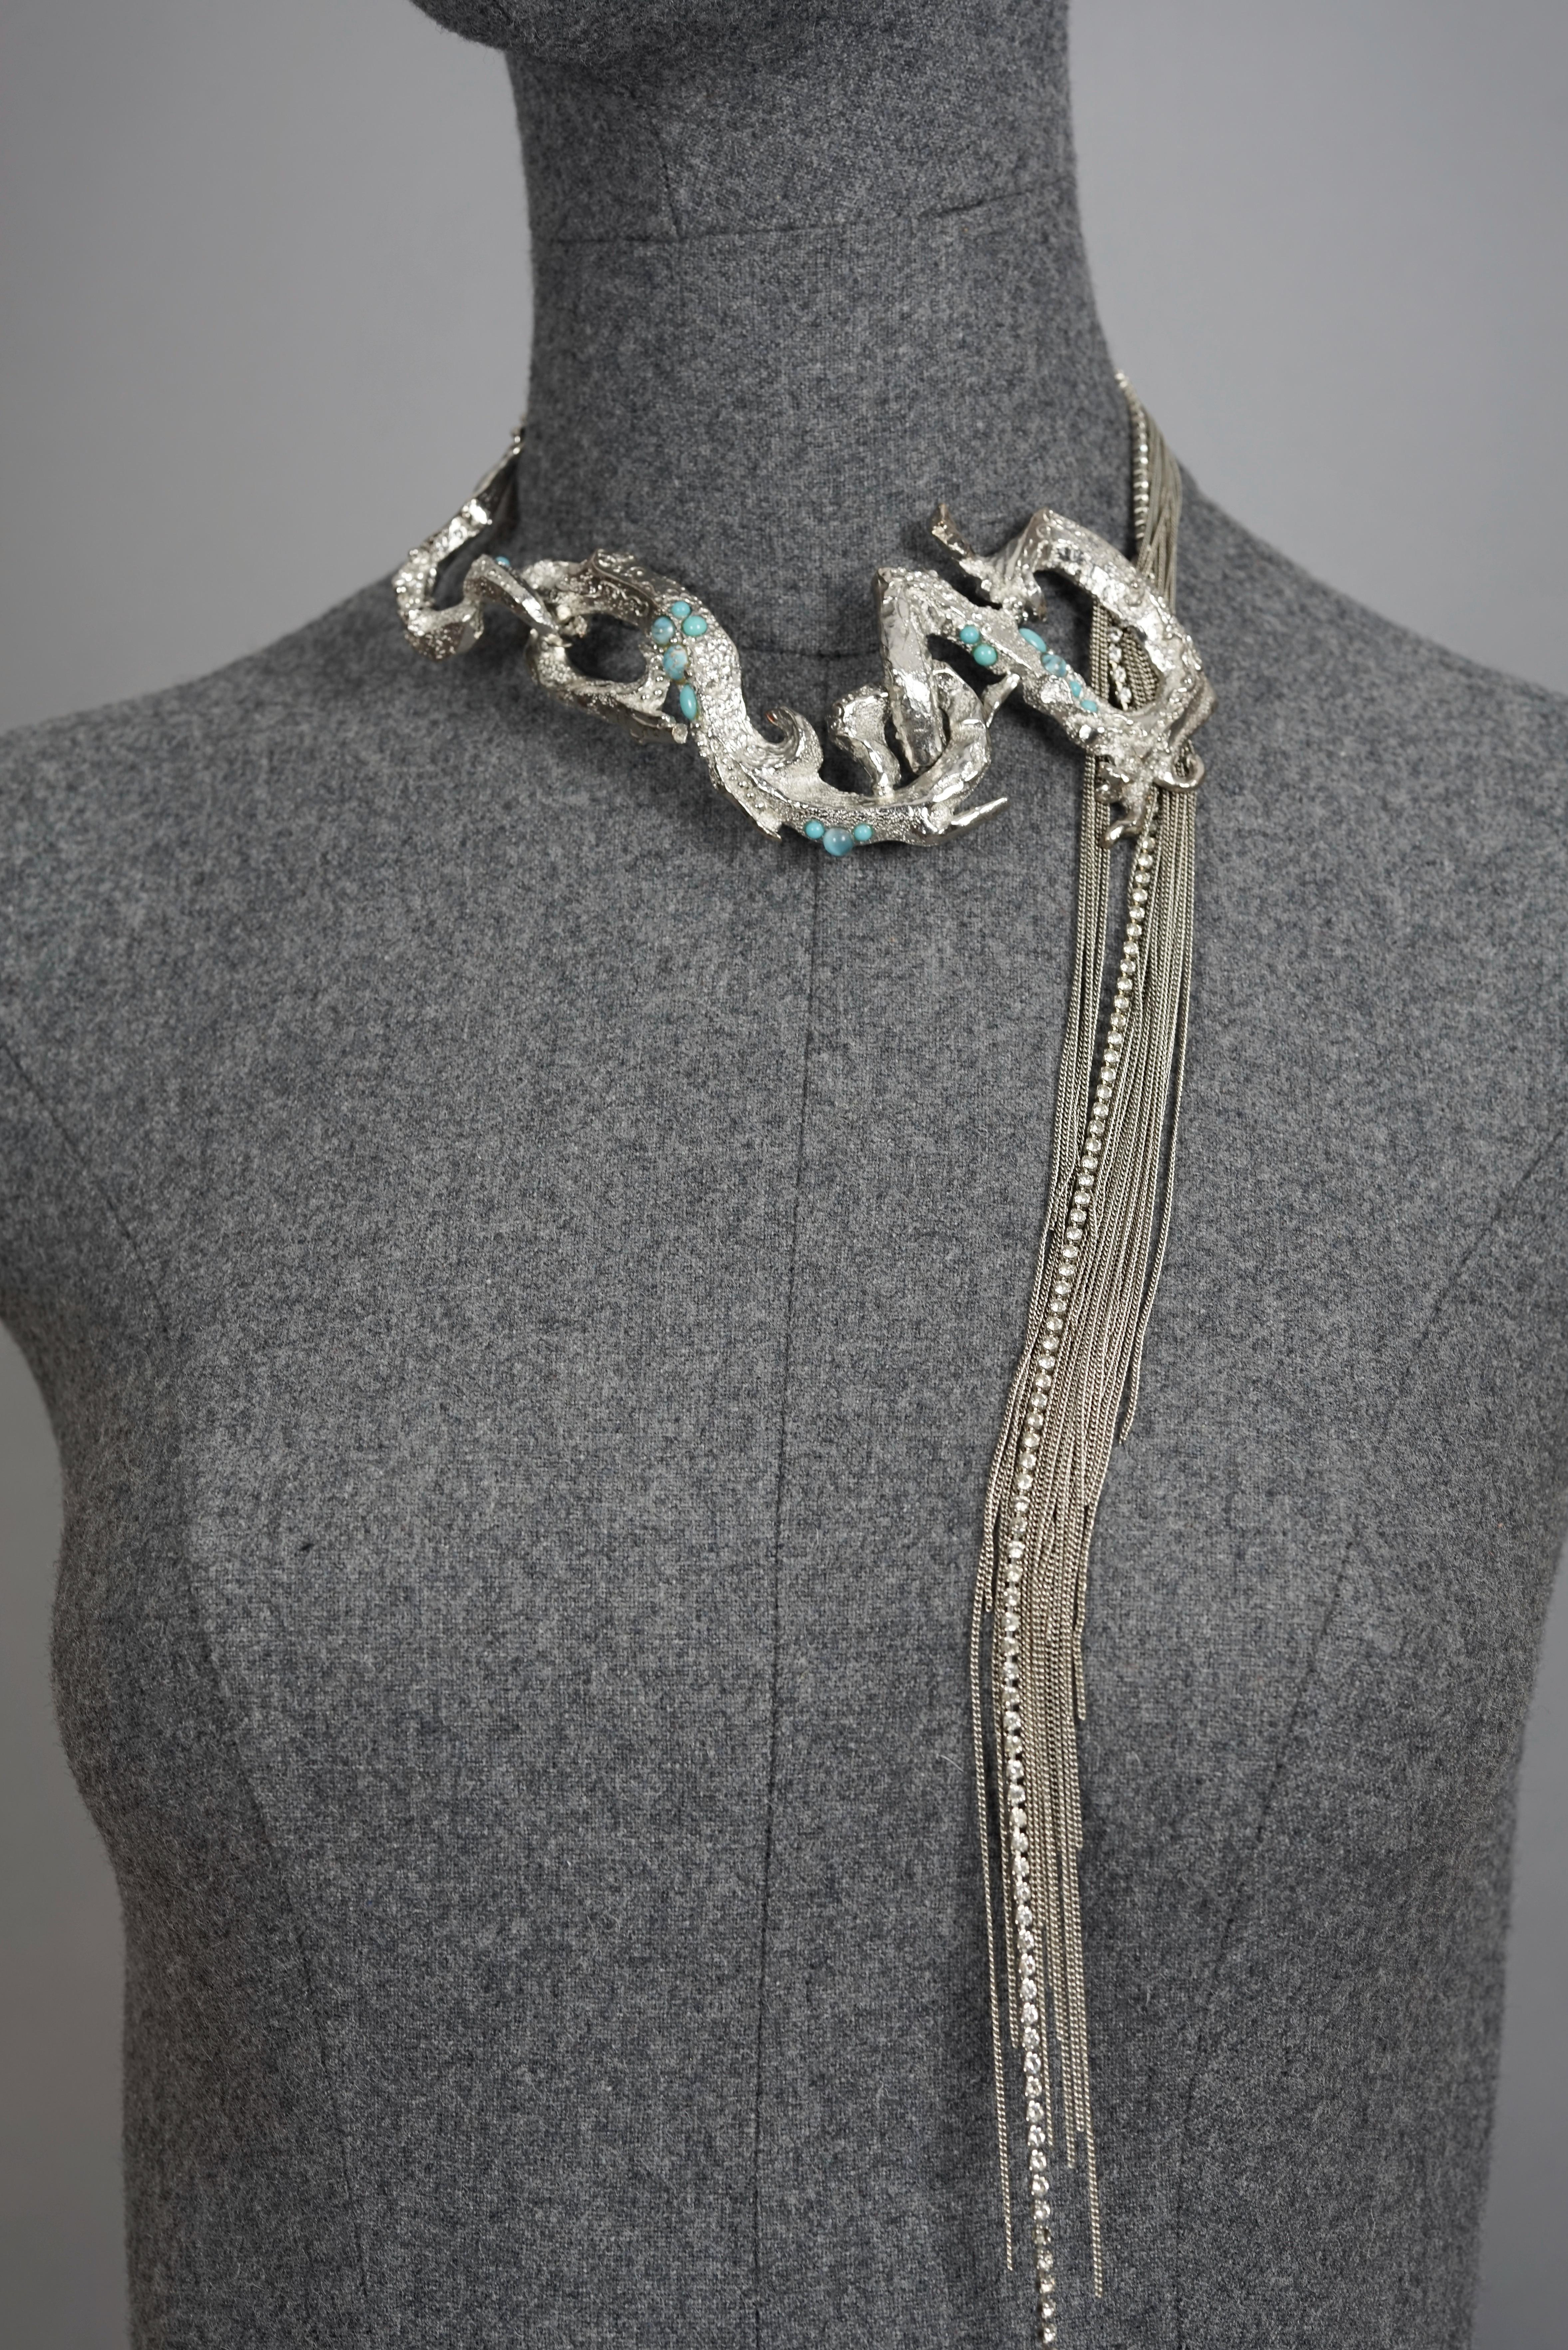 Vintage CHRISTIAN LACROIX Opulent Rigid Cascading Multi Chain Choker Necklace

Measurements:
Height: 2.56 inches (6.5 cm)
Wearable Length: 13.97 inches (35.5 cm), 14.76 inches (37.5 cm) and 15.74 inches (40 cm)

Features:
- 100% Authentic CHRISTIAN